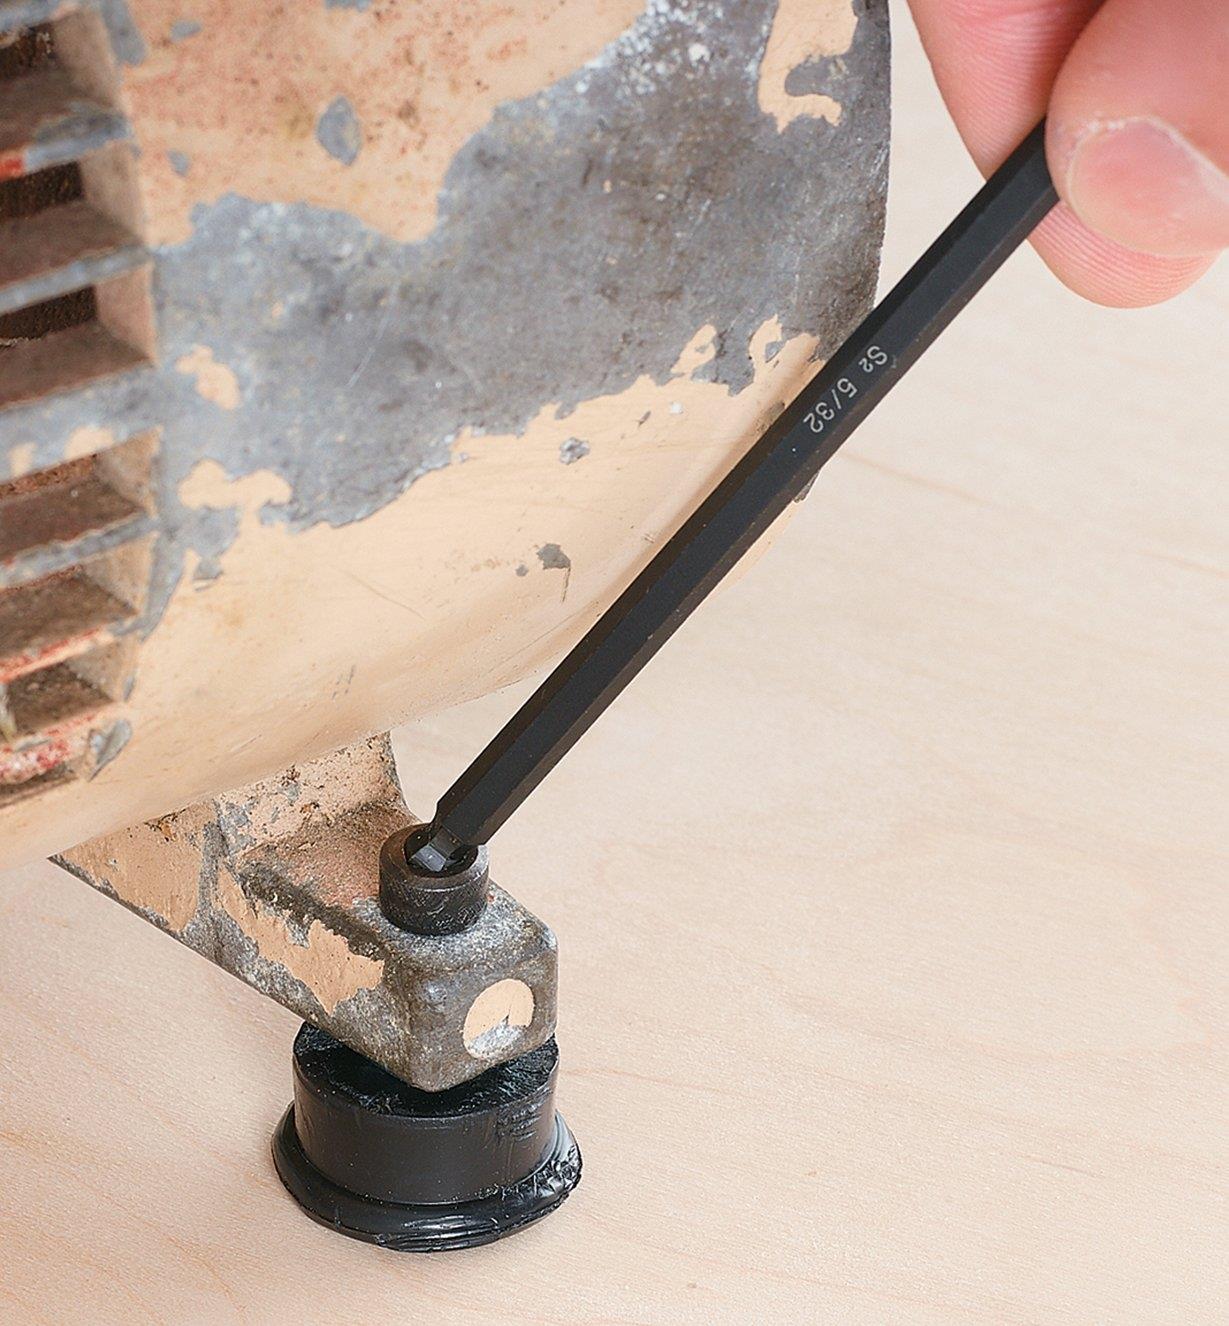 Using the ball end of a hex key to access a fastener on a machine foot